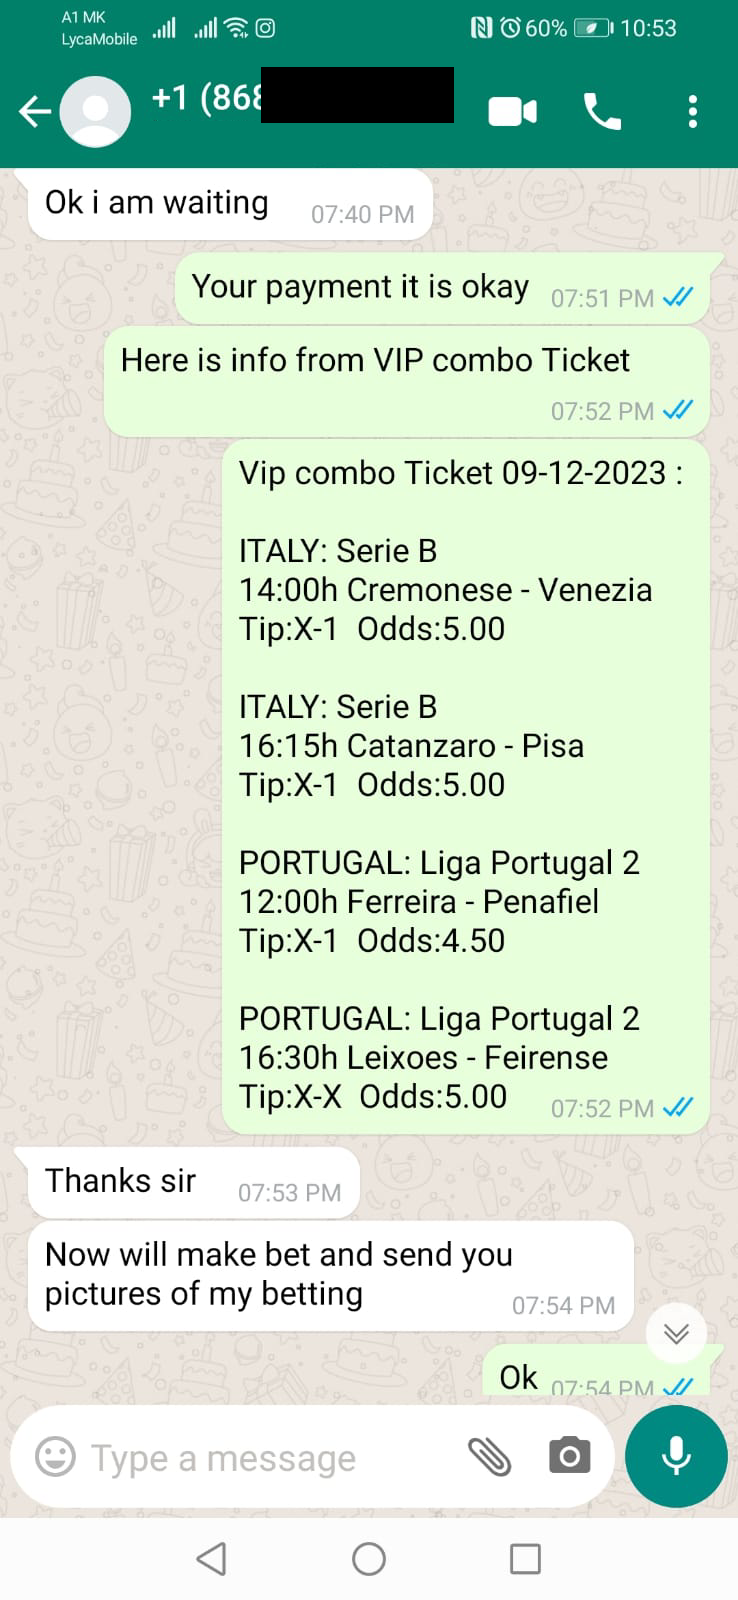 Best Bet 365 Fixed Games and Soccer Professional Tips 1X2